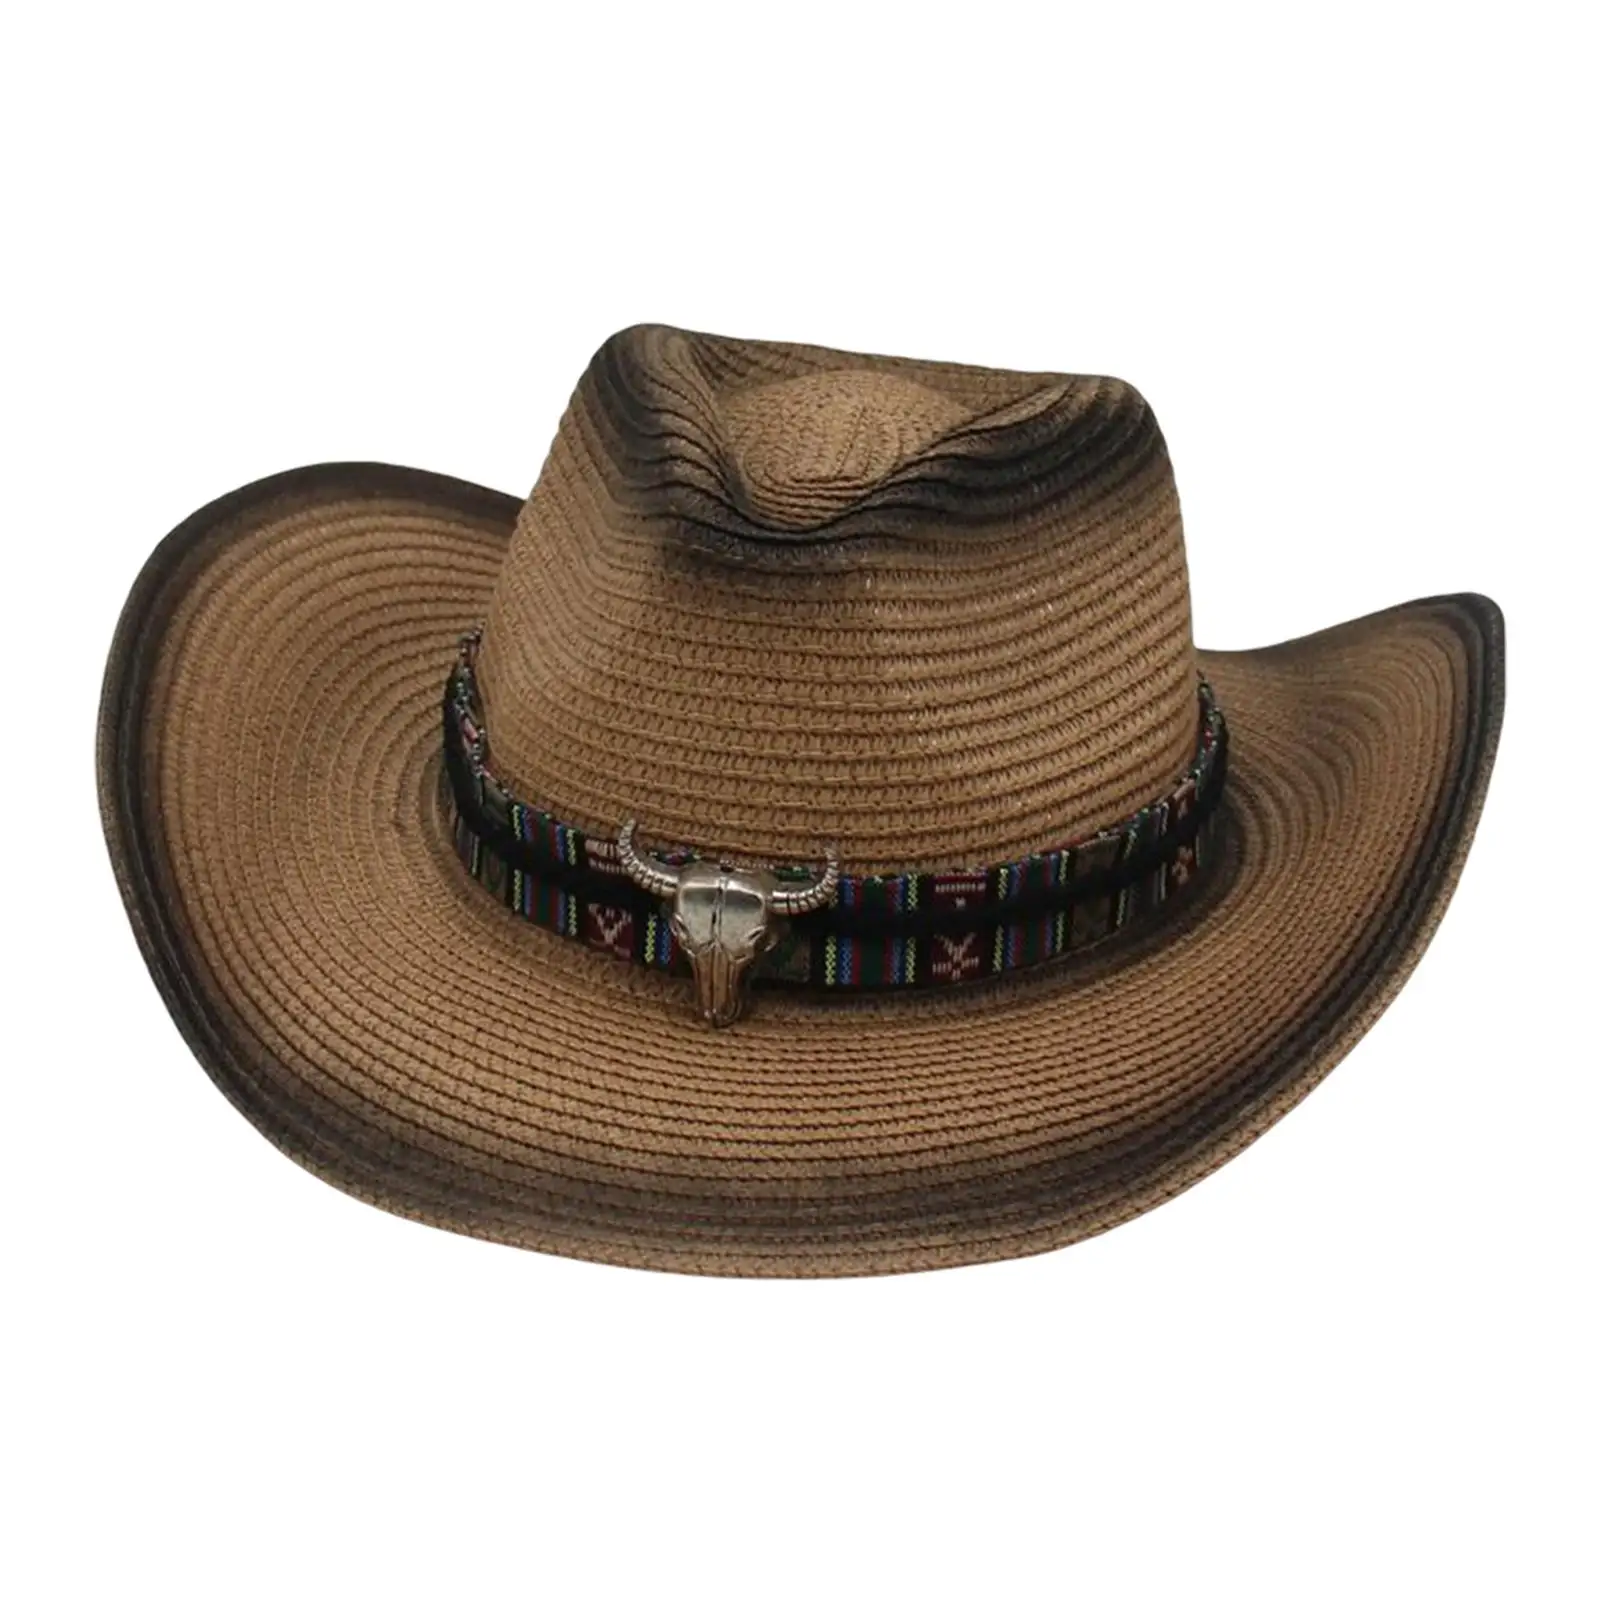 Fashionable Western Cowboy Hat Wide Costume Shapeable Cowgirl Hat Sunshade Hat for Teens Holiday Fishing Outdoor Leisure Summer